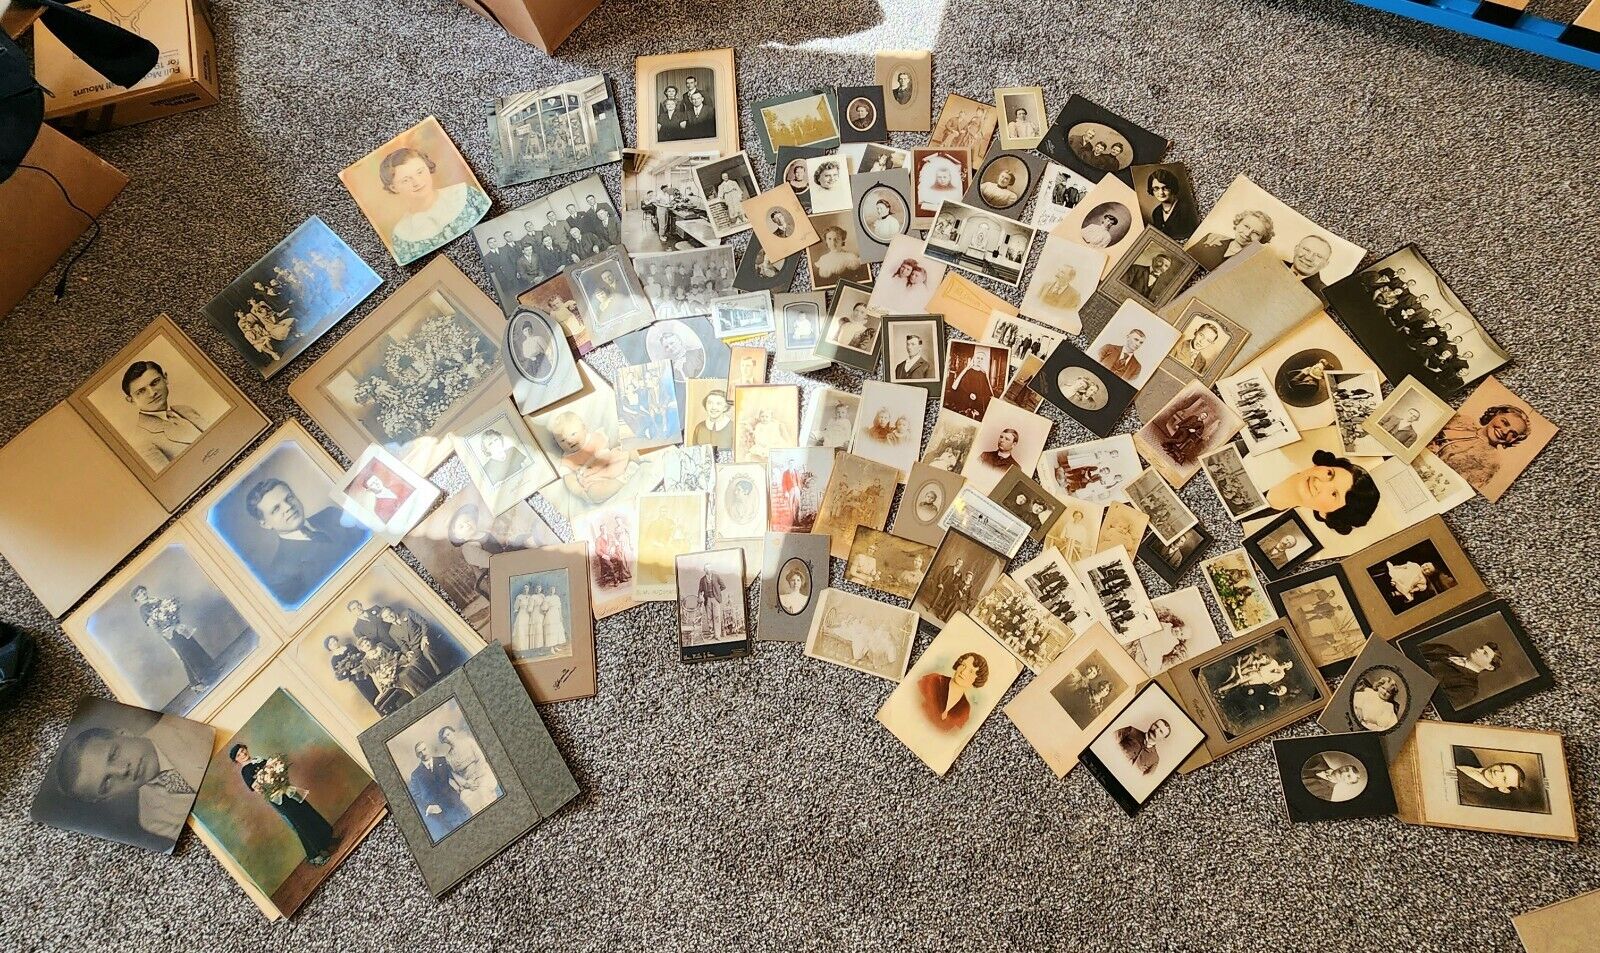 Cabinet Cards And More From 1900's (Please Read Full Description)